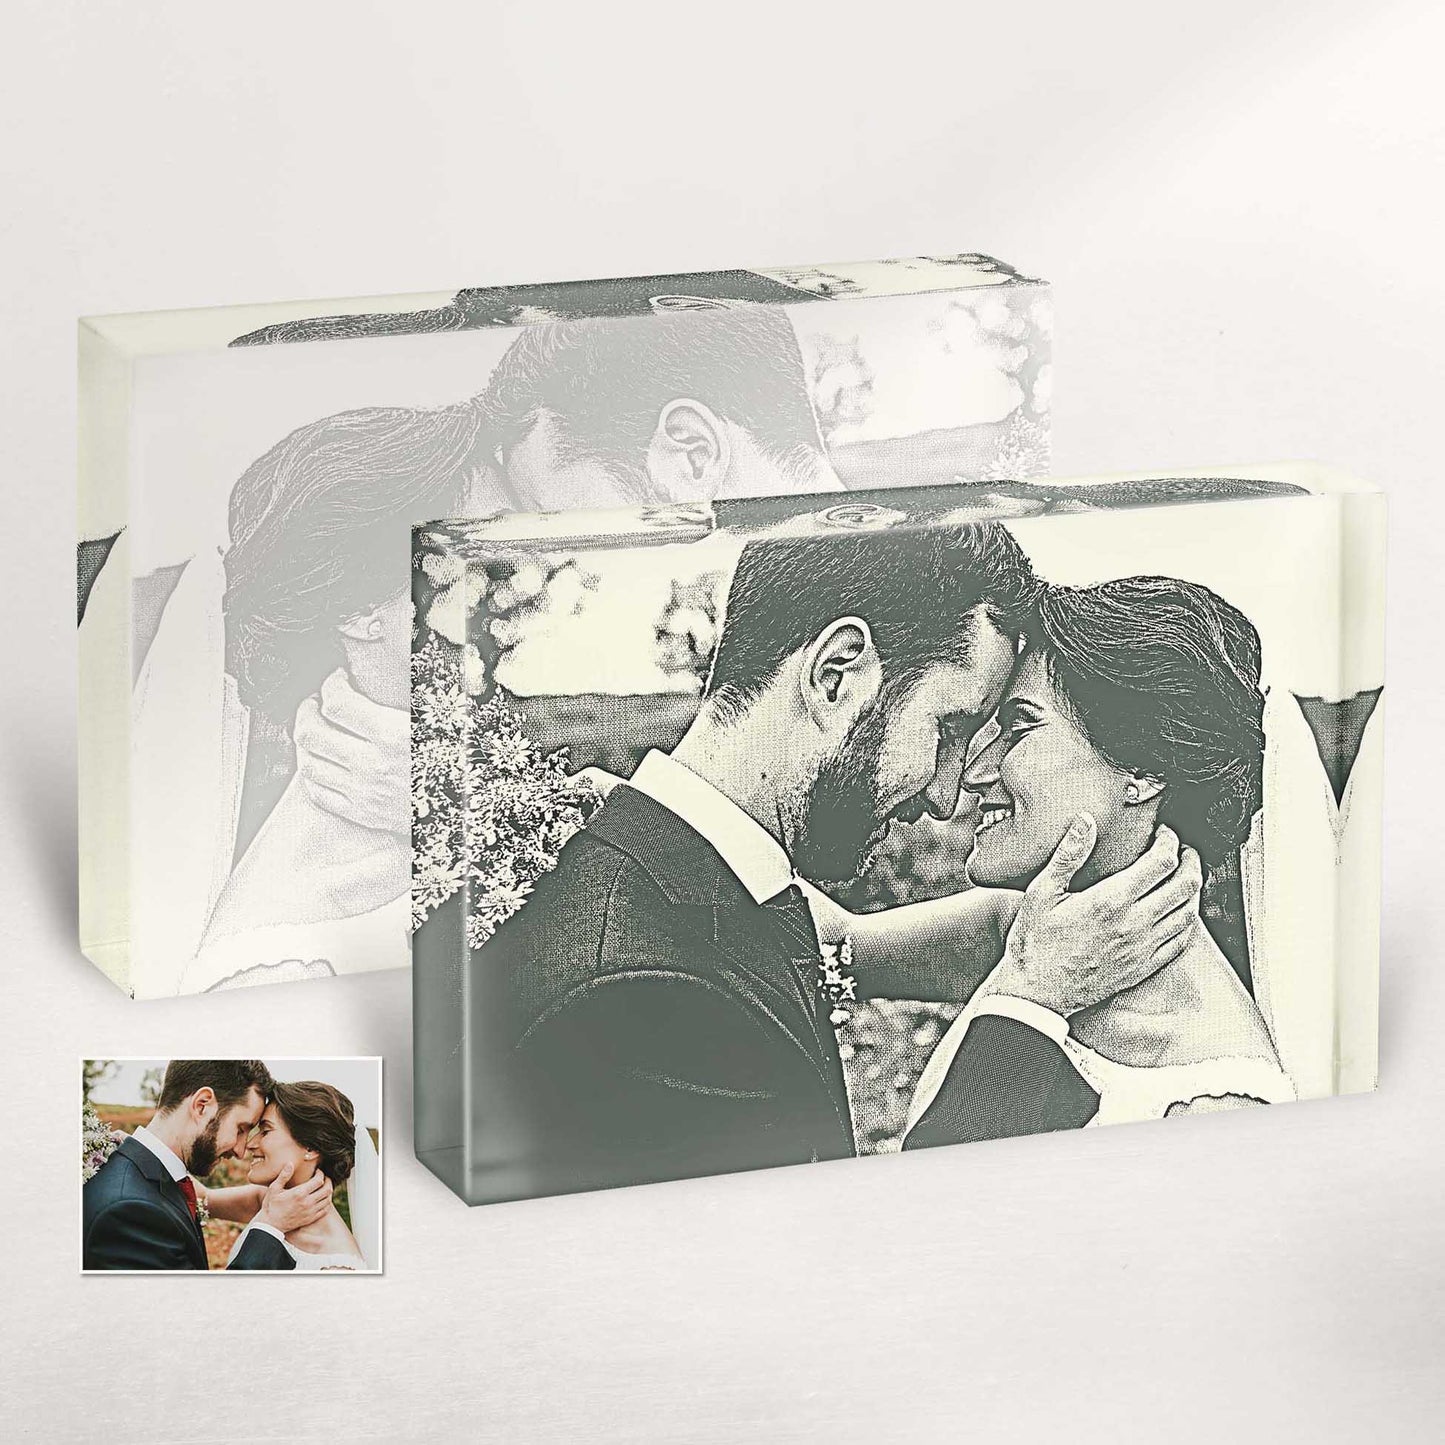 Elevate your gift-giving game with our personalised Money Engraved Acrylic Block Photo. The engraved money design adds a touch of elegance and exclusivity, making it a standout and unforgettable present for your loved ones